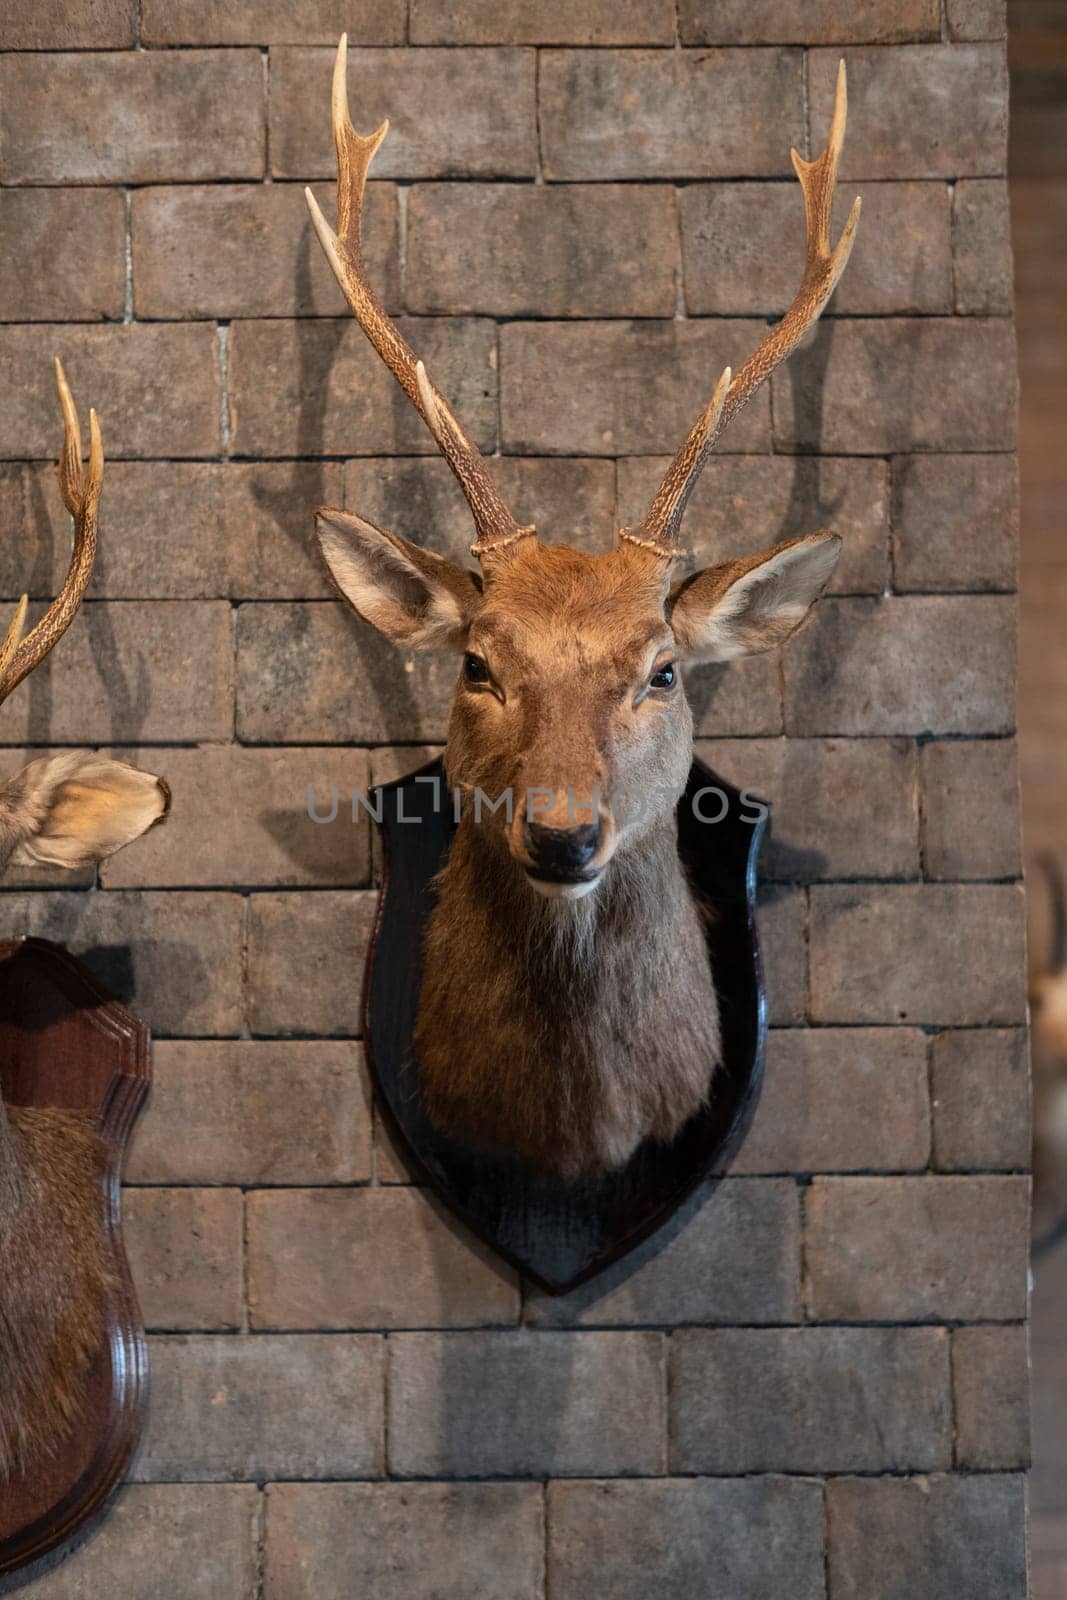 Head deer mount on the wall, 2 head, deer antlers attached to the wall by wuttichaicci